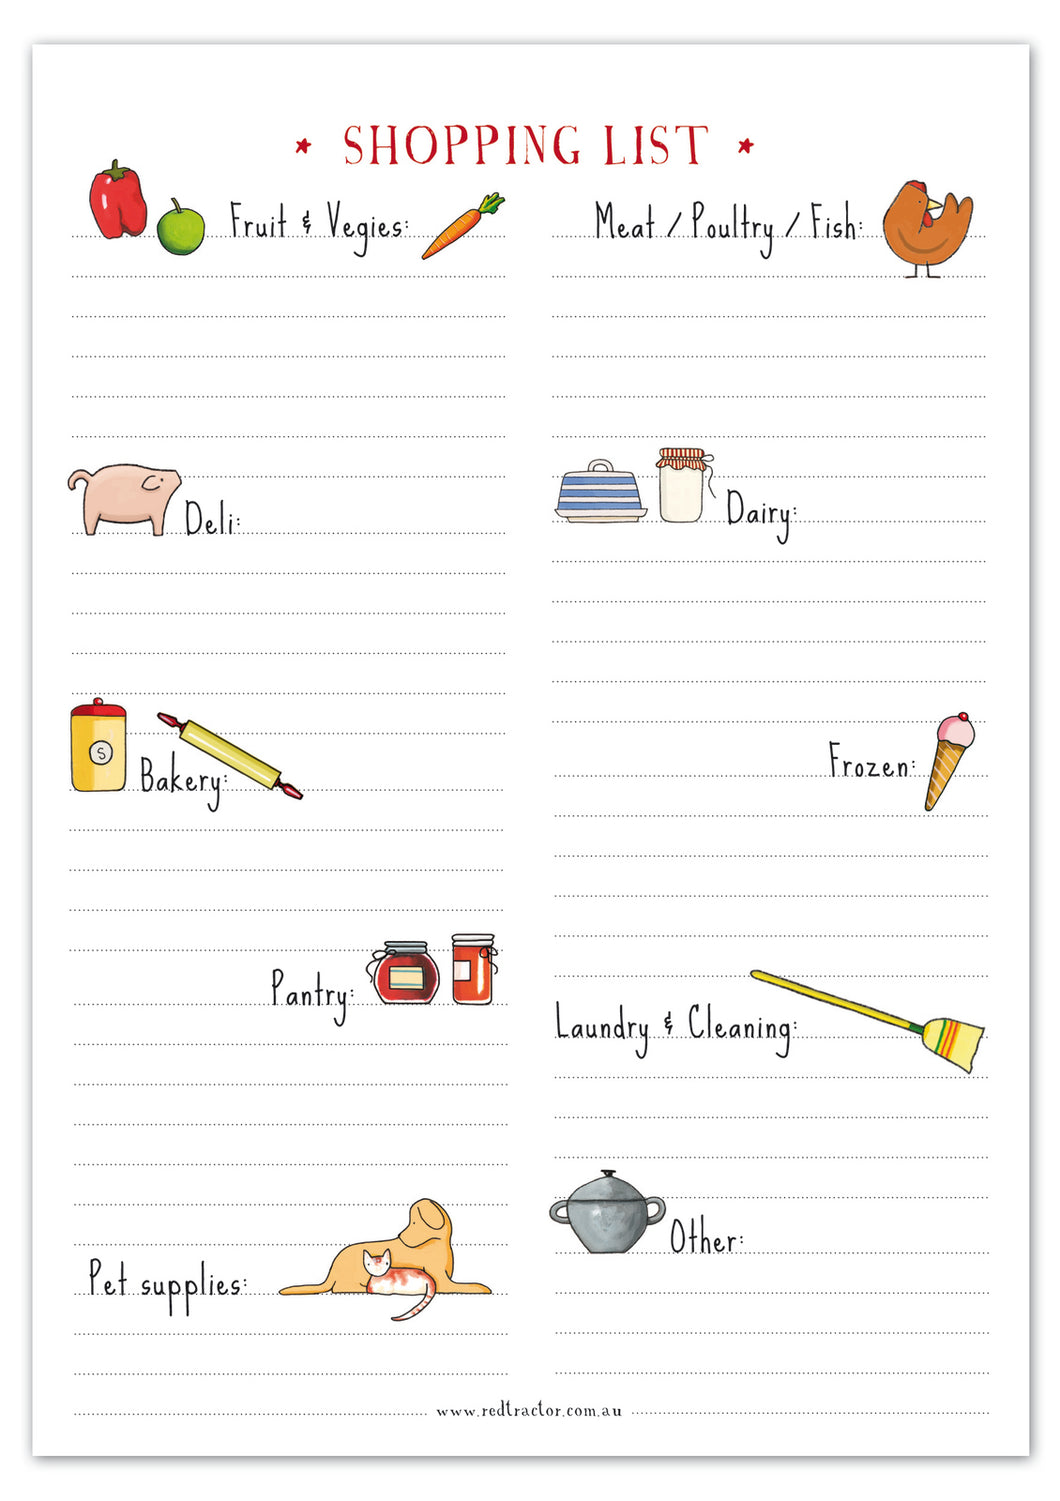 Shopping List | Red Tractor Designs